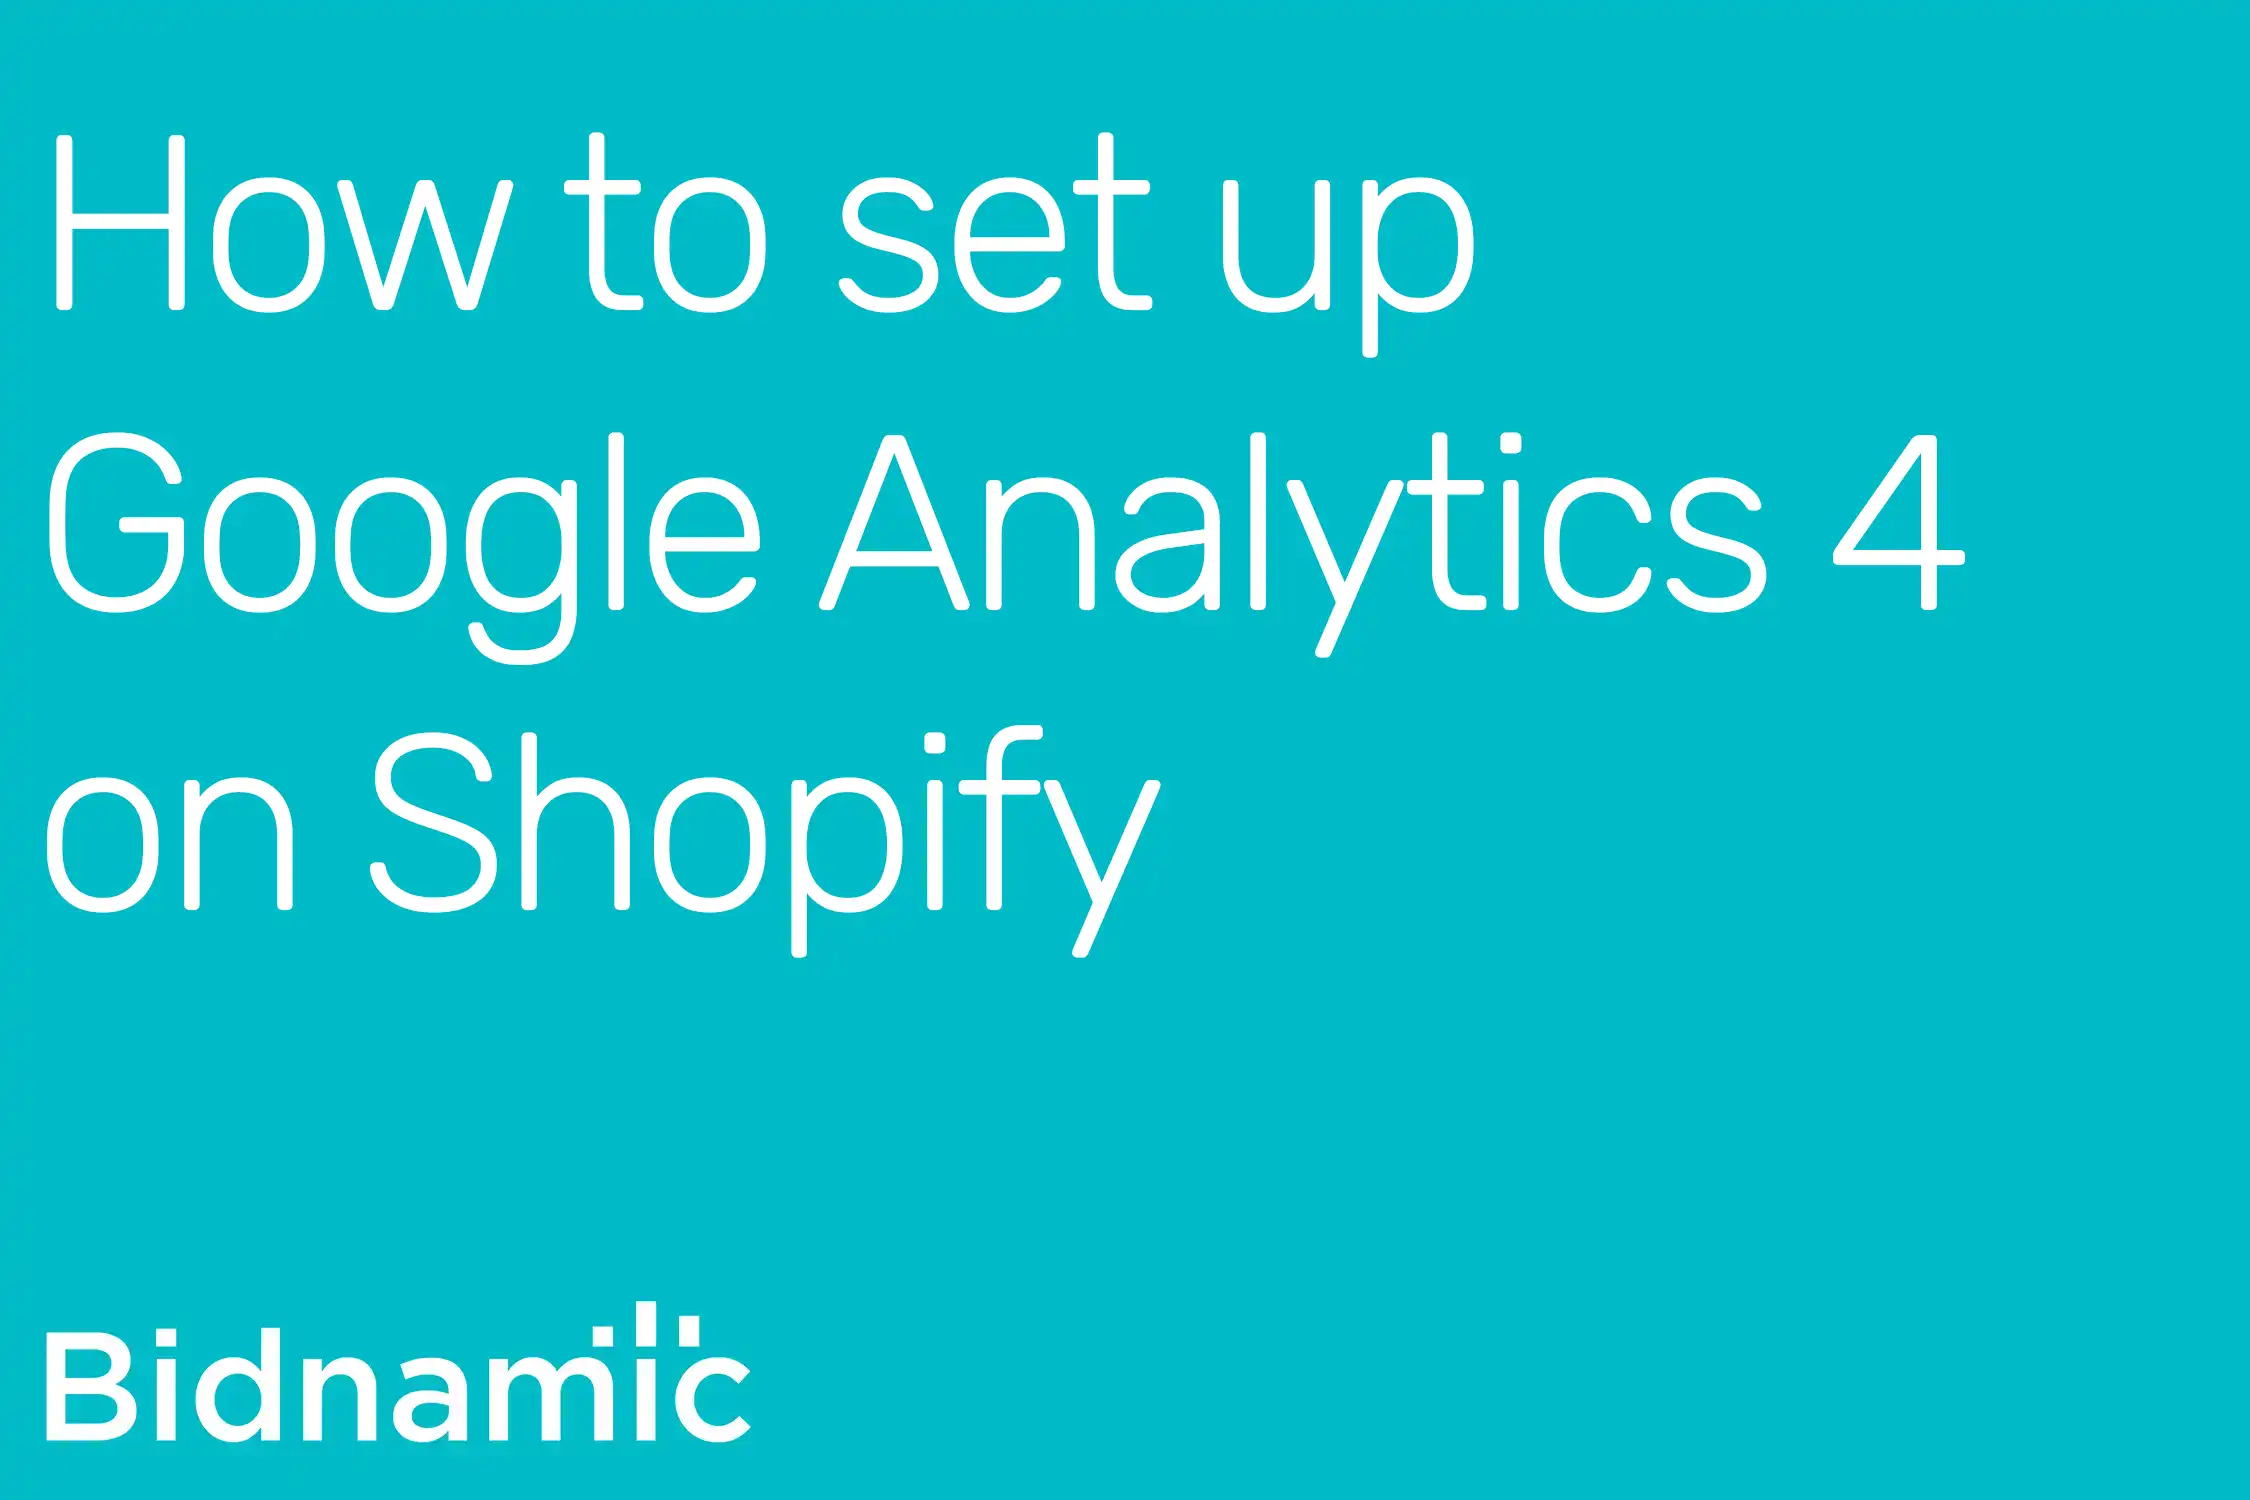 How to set up Google Analytics 4 on Shopify